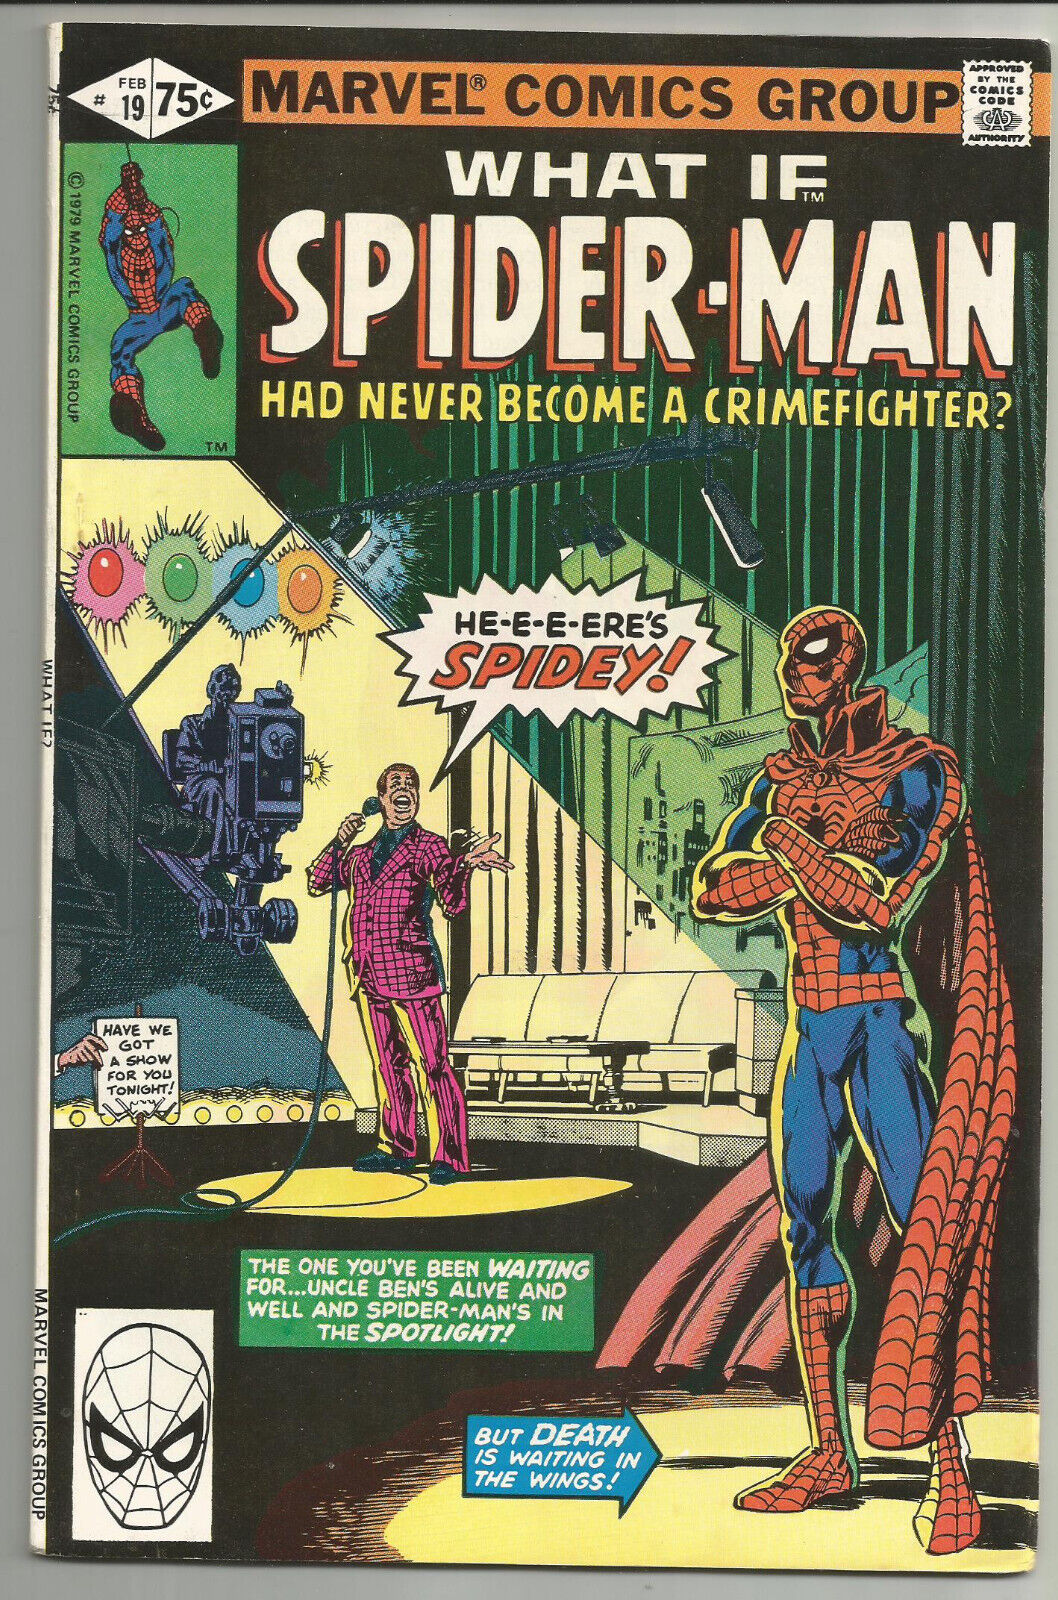 WHAT IF #19 - SPIDER-MAN  - NEAR MINT- 9.2 - MARVEL 1980